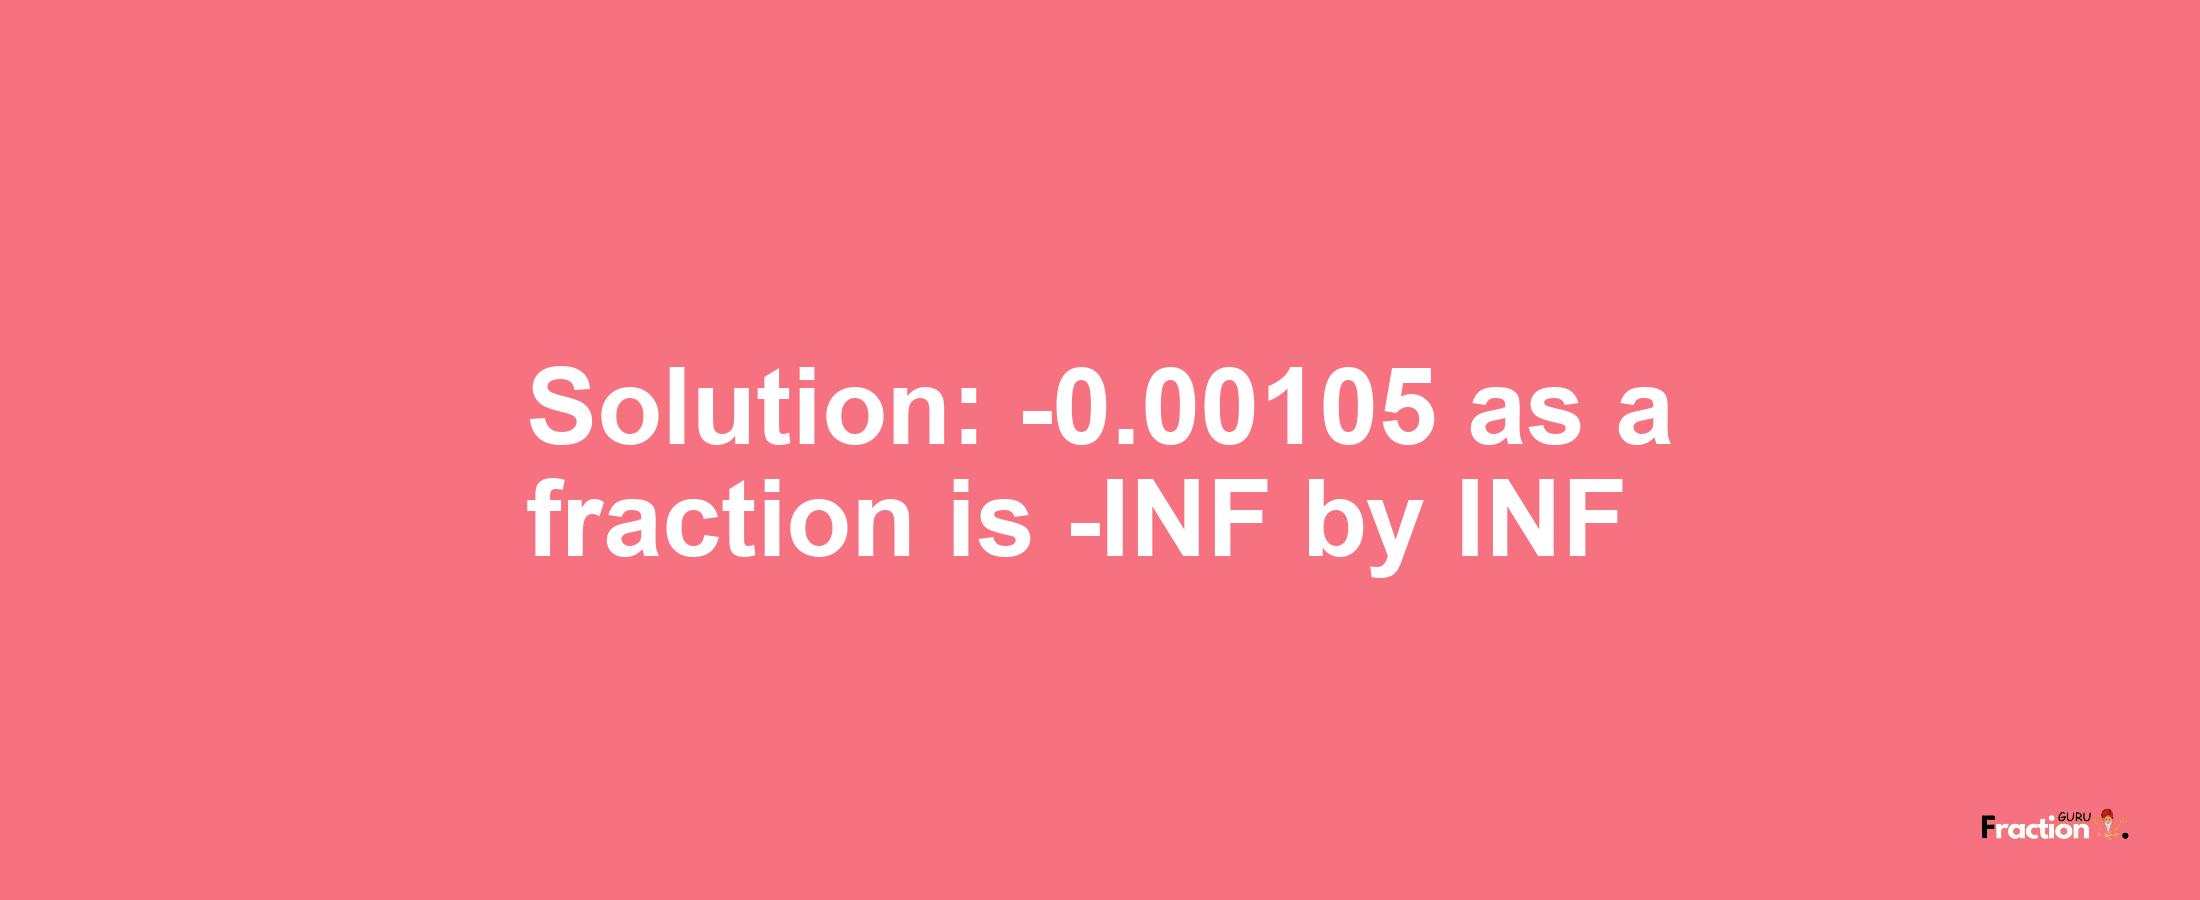 Solution:-0.00105 as a fraction is -INF/INF